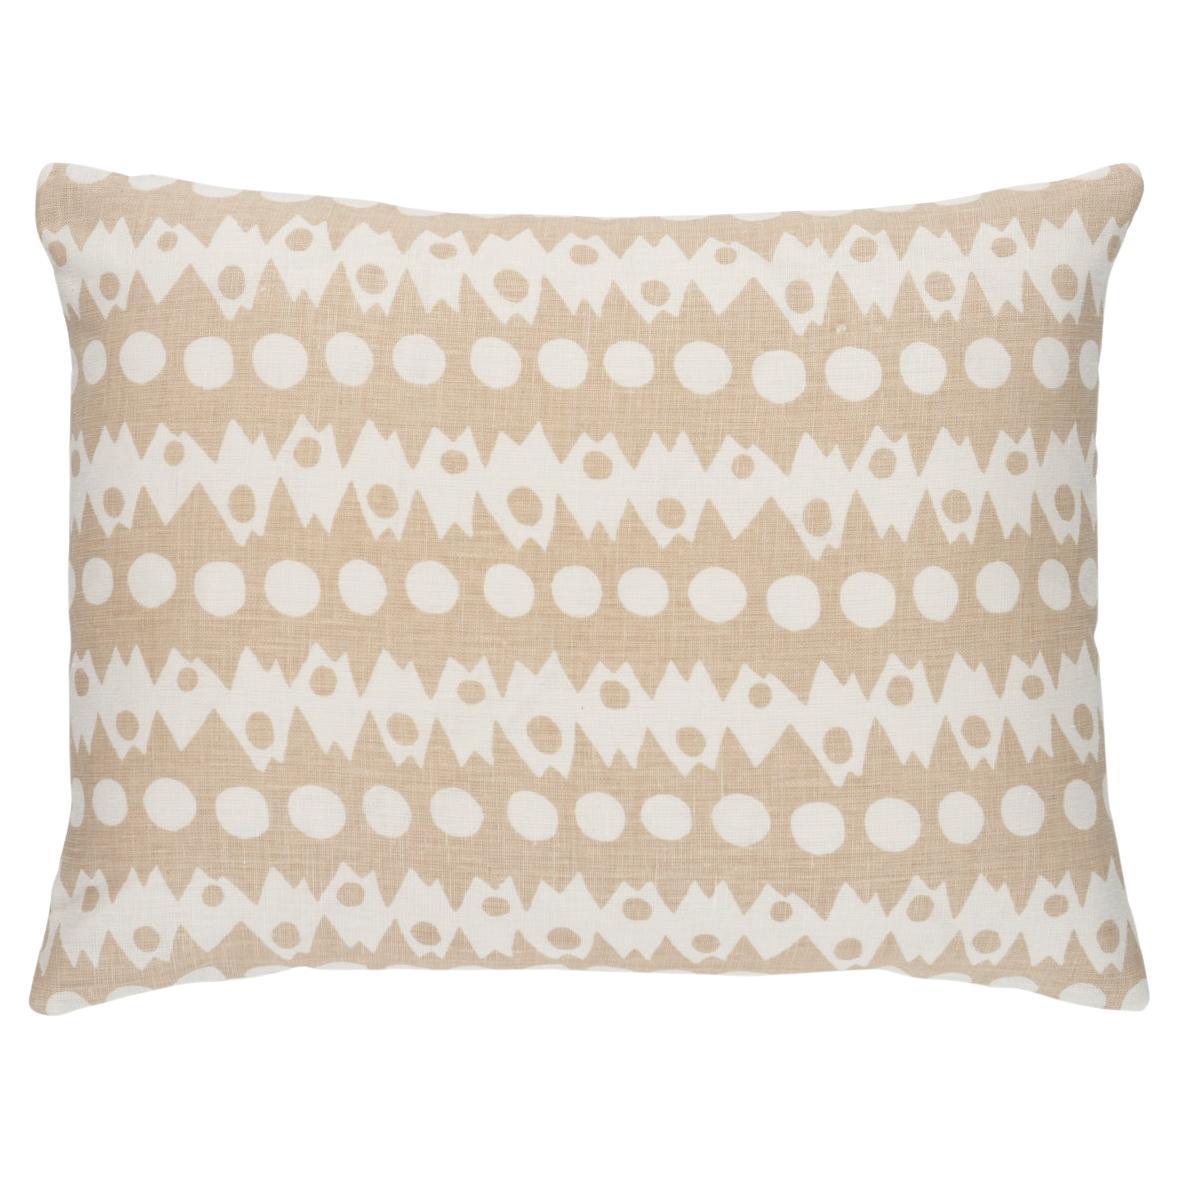 Trickledown Pillow in Natural, 18x12"